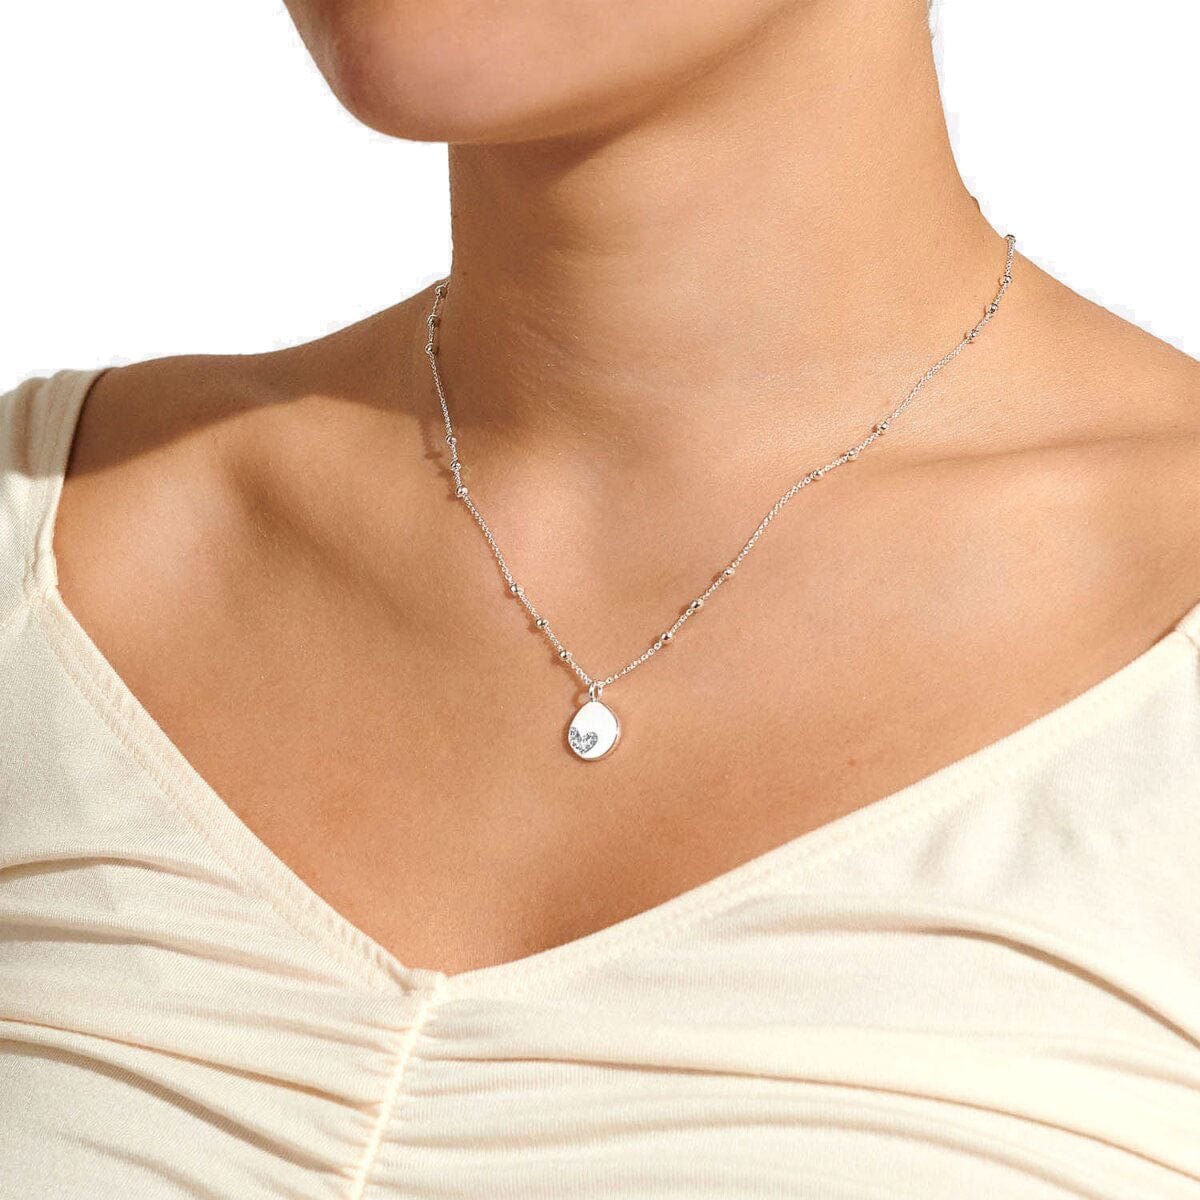 Joma Jewellery Necklace Joma Jewellery Necklace - A little Lucky To Have A Mum Like You